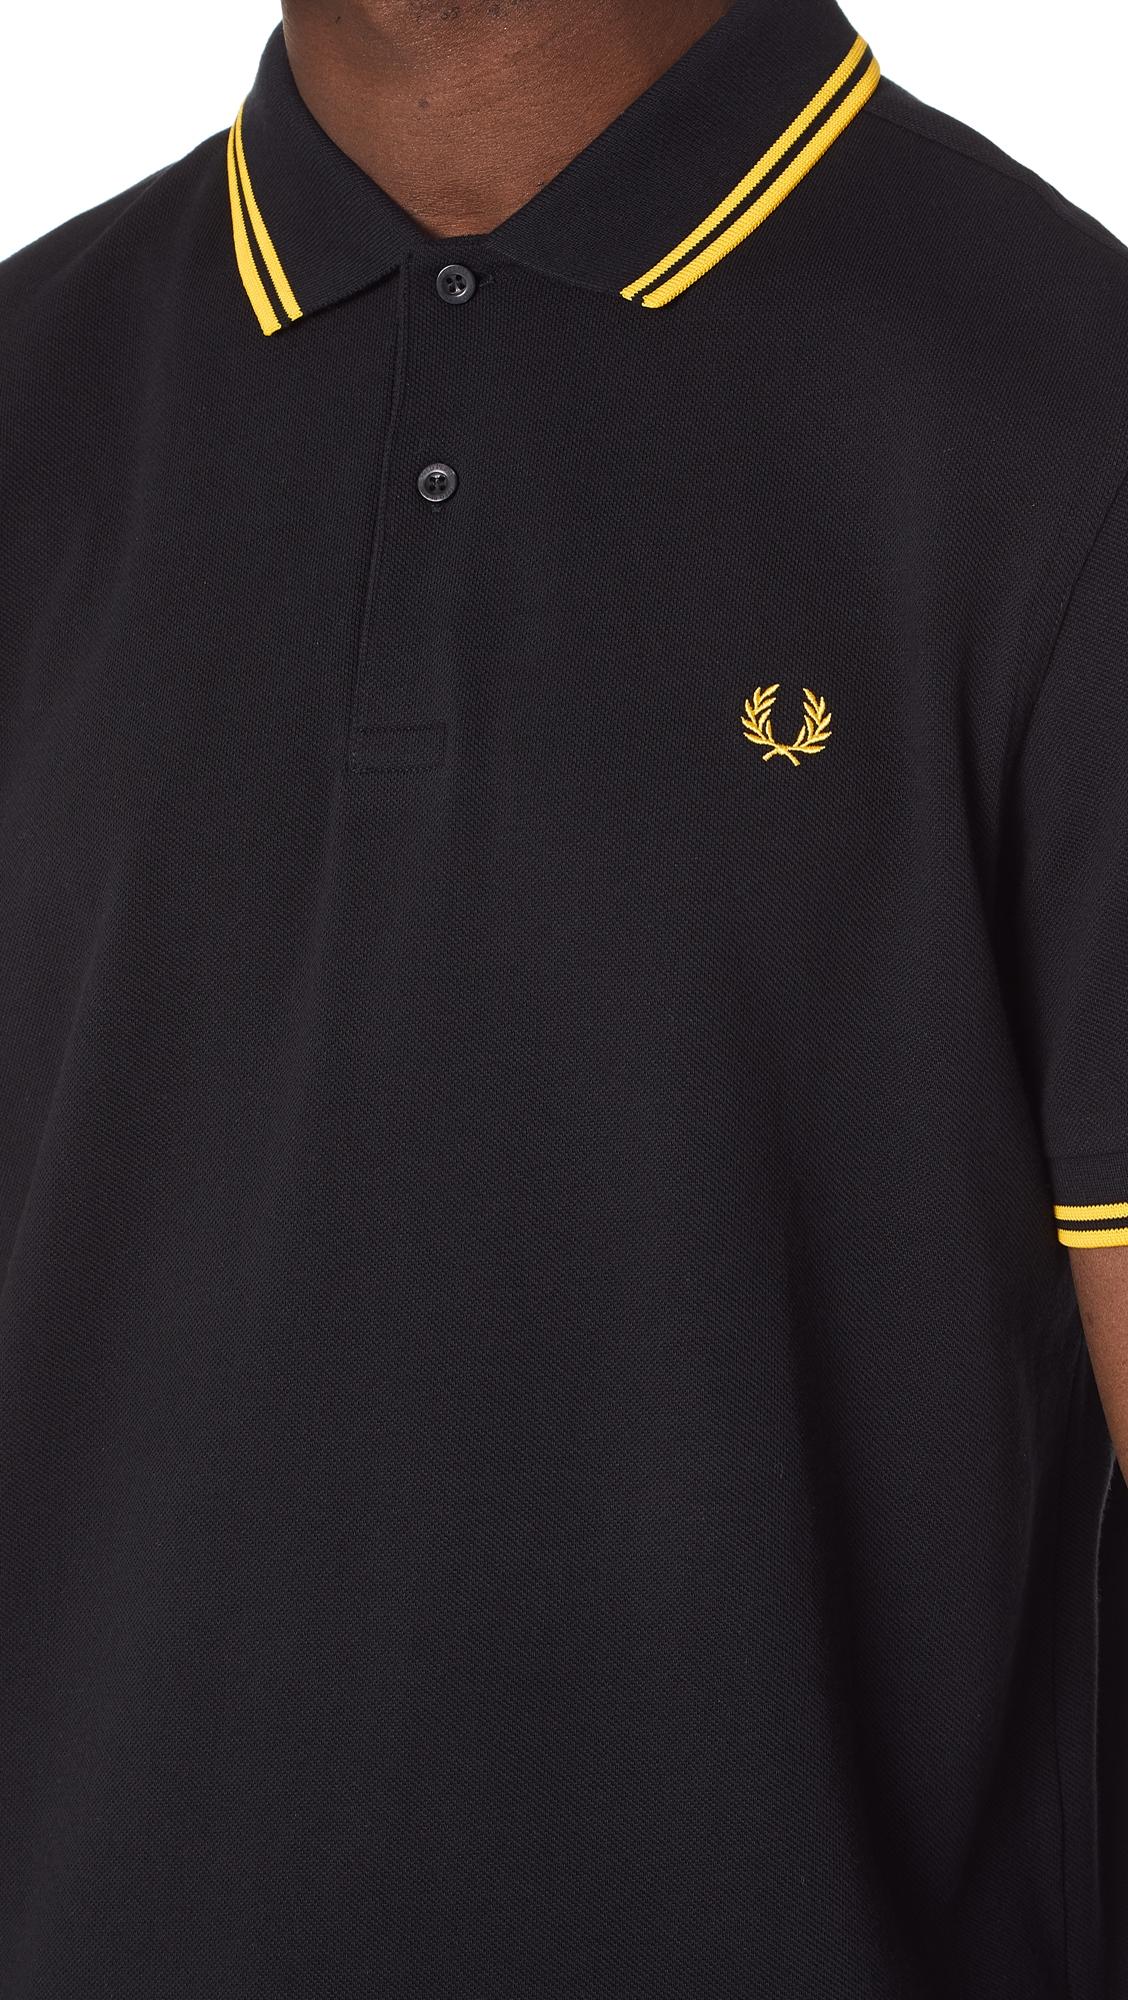 fred perry black yellow